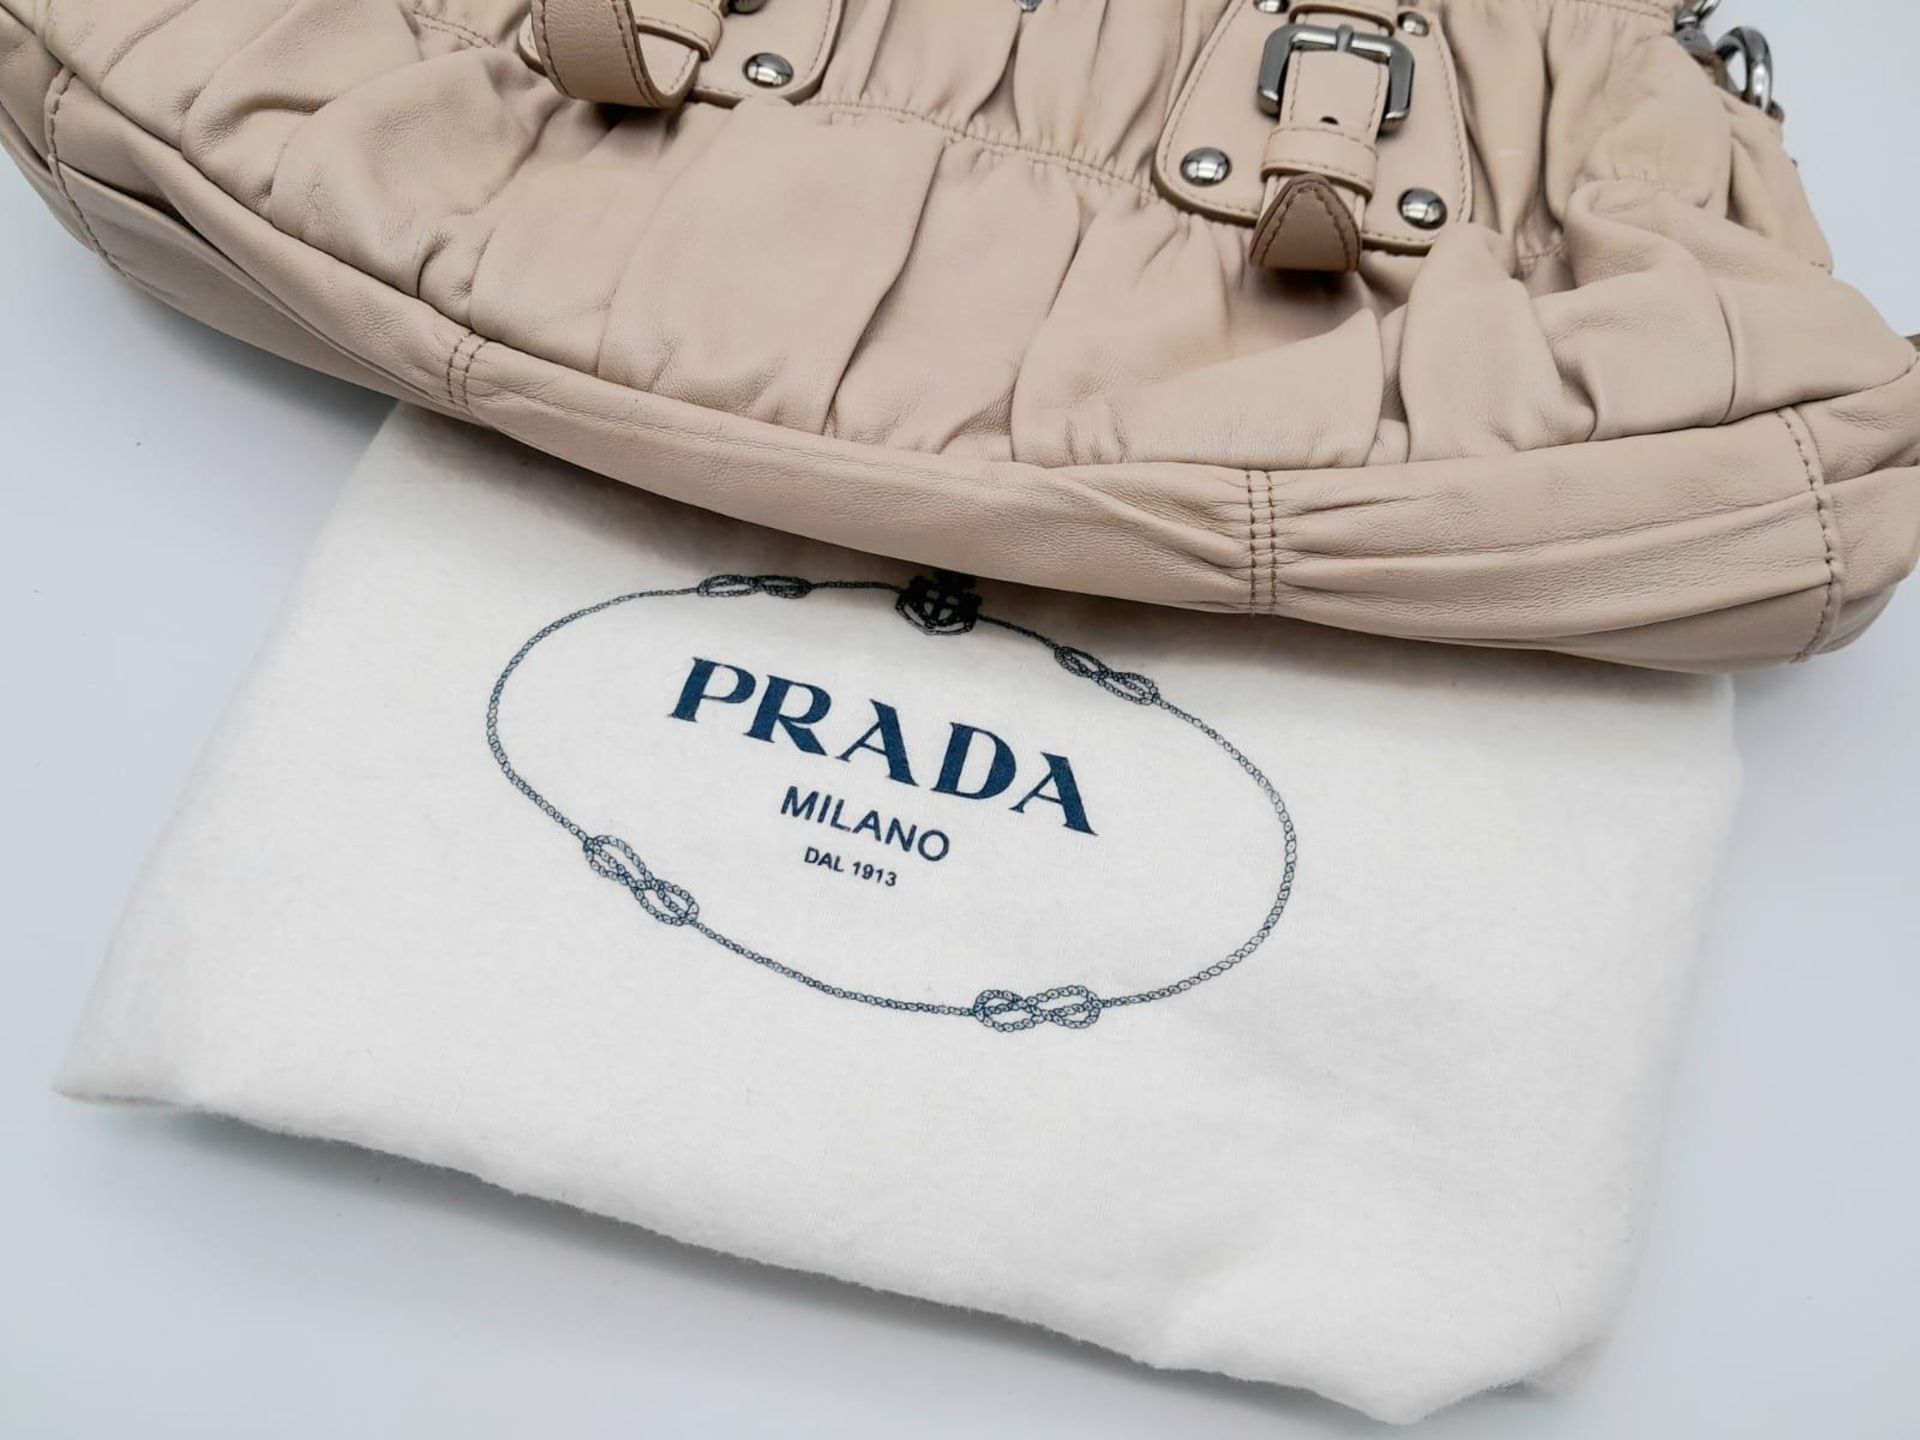 A PRADA BEIGE NAPPA LEATHER GAUFRE POMICE TOTE BAG. SILVER TONE HARD WEAR INCLUDING BUCKLE DETAIL. - Image 11 of 27